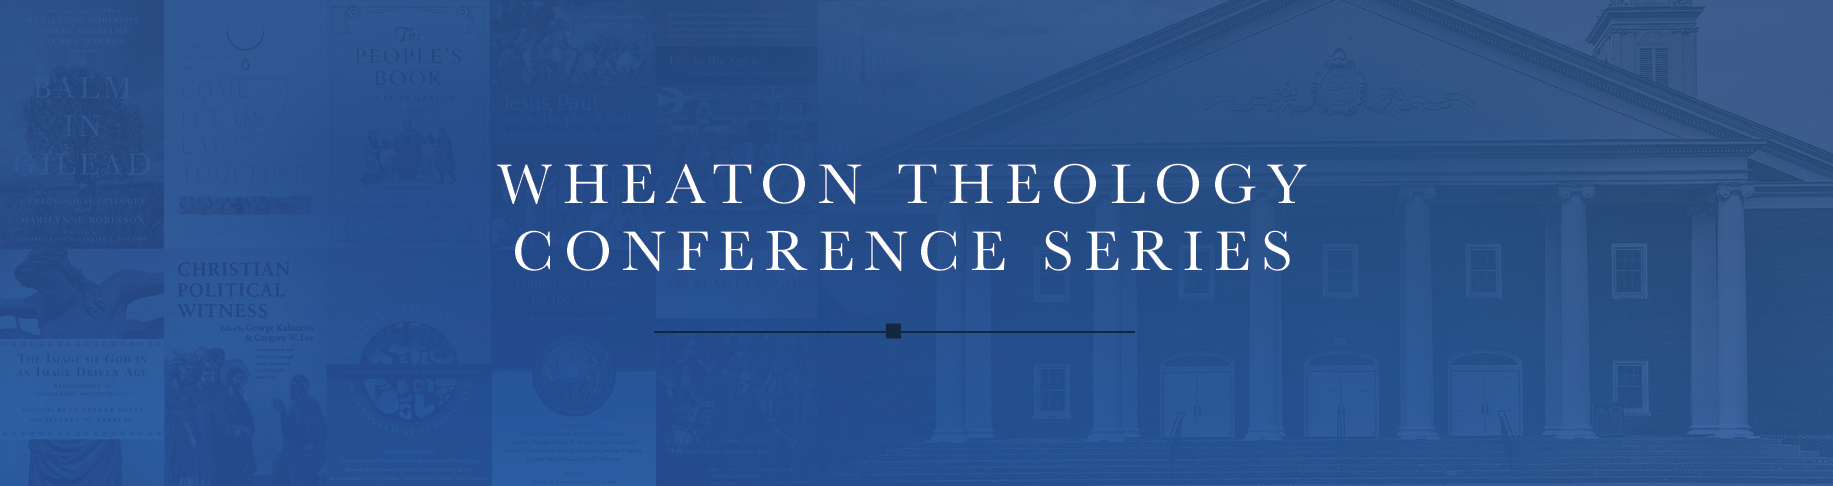 Wheaton Theology Conference Series